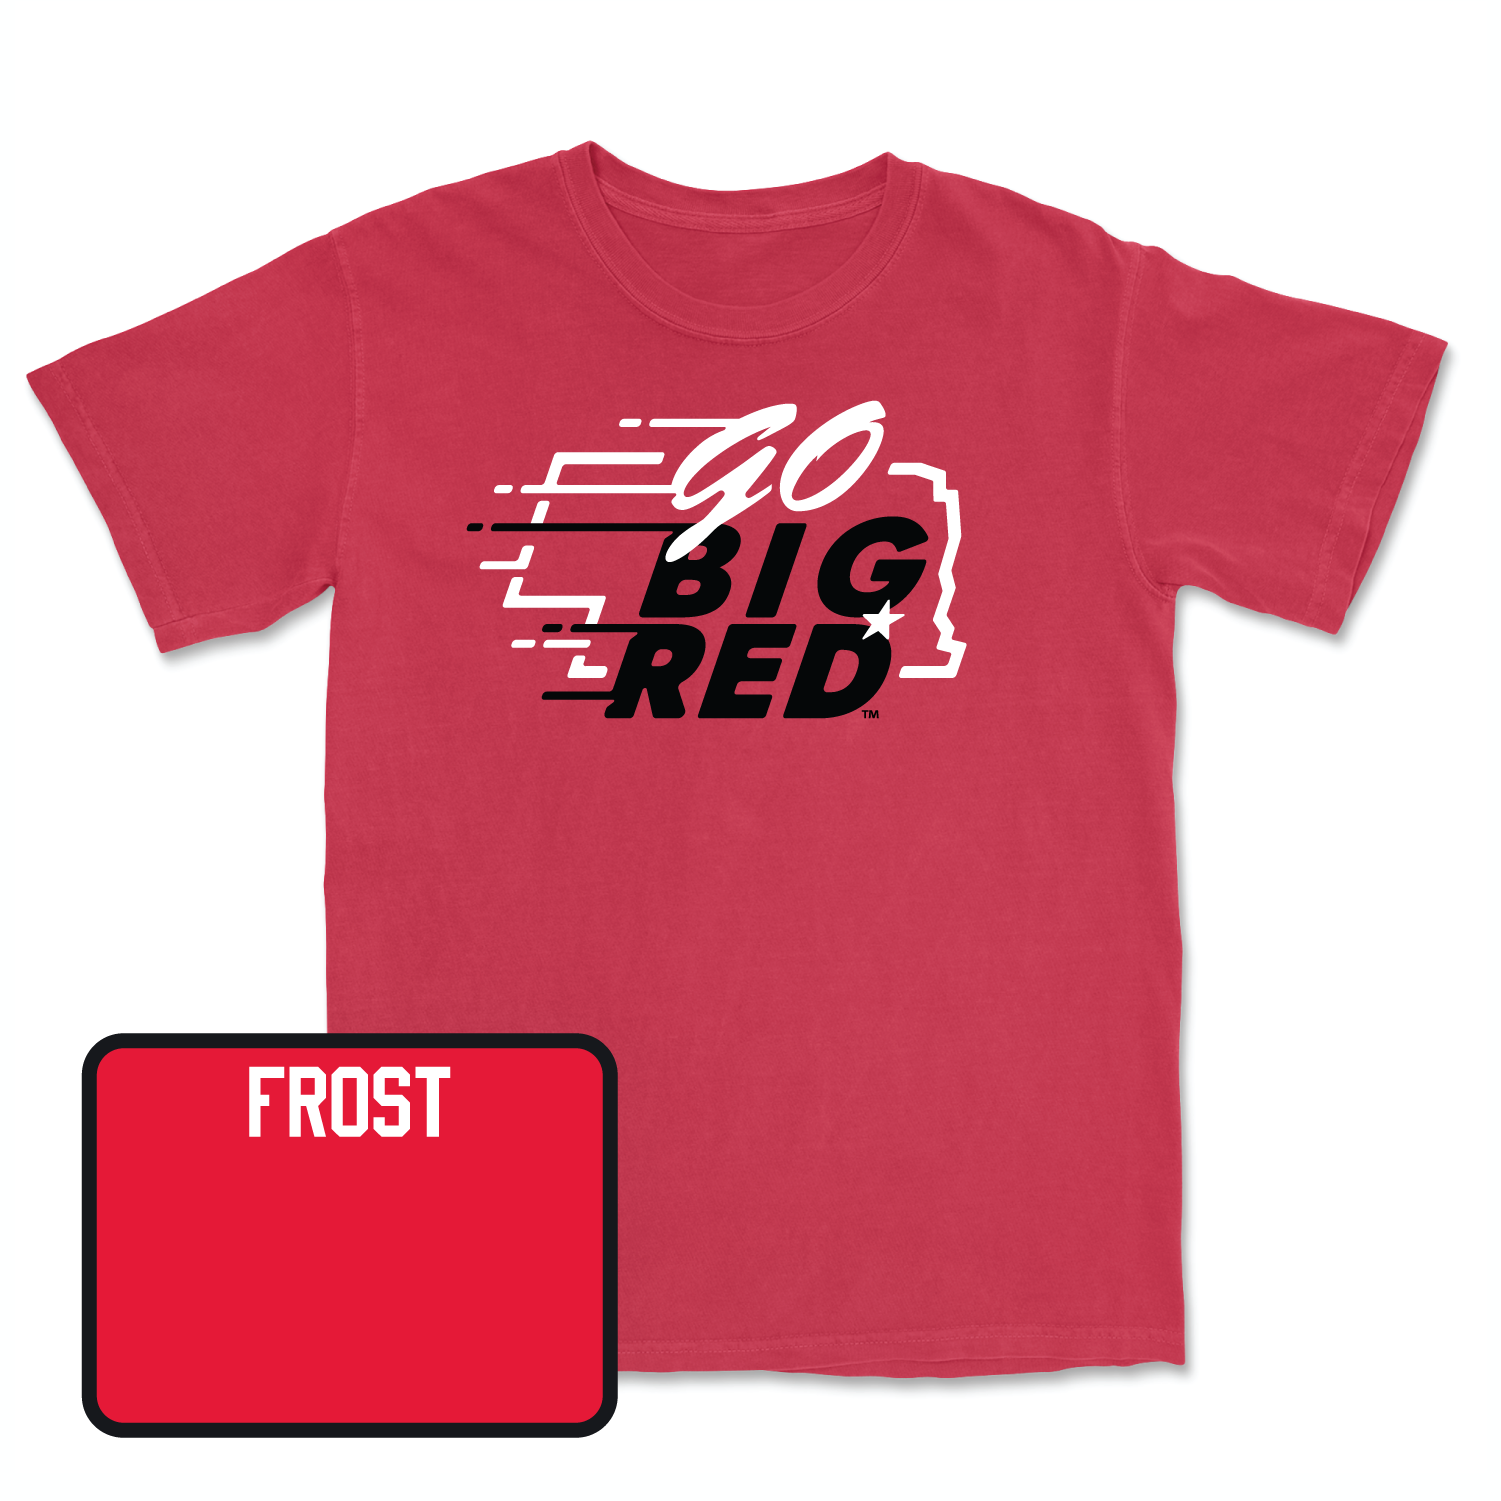 Red Women's Gymnastics GBR Tee Small / Emalee Frost